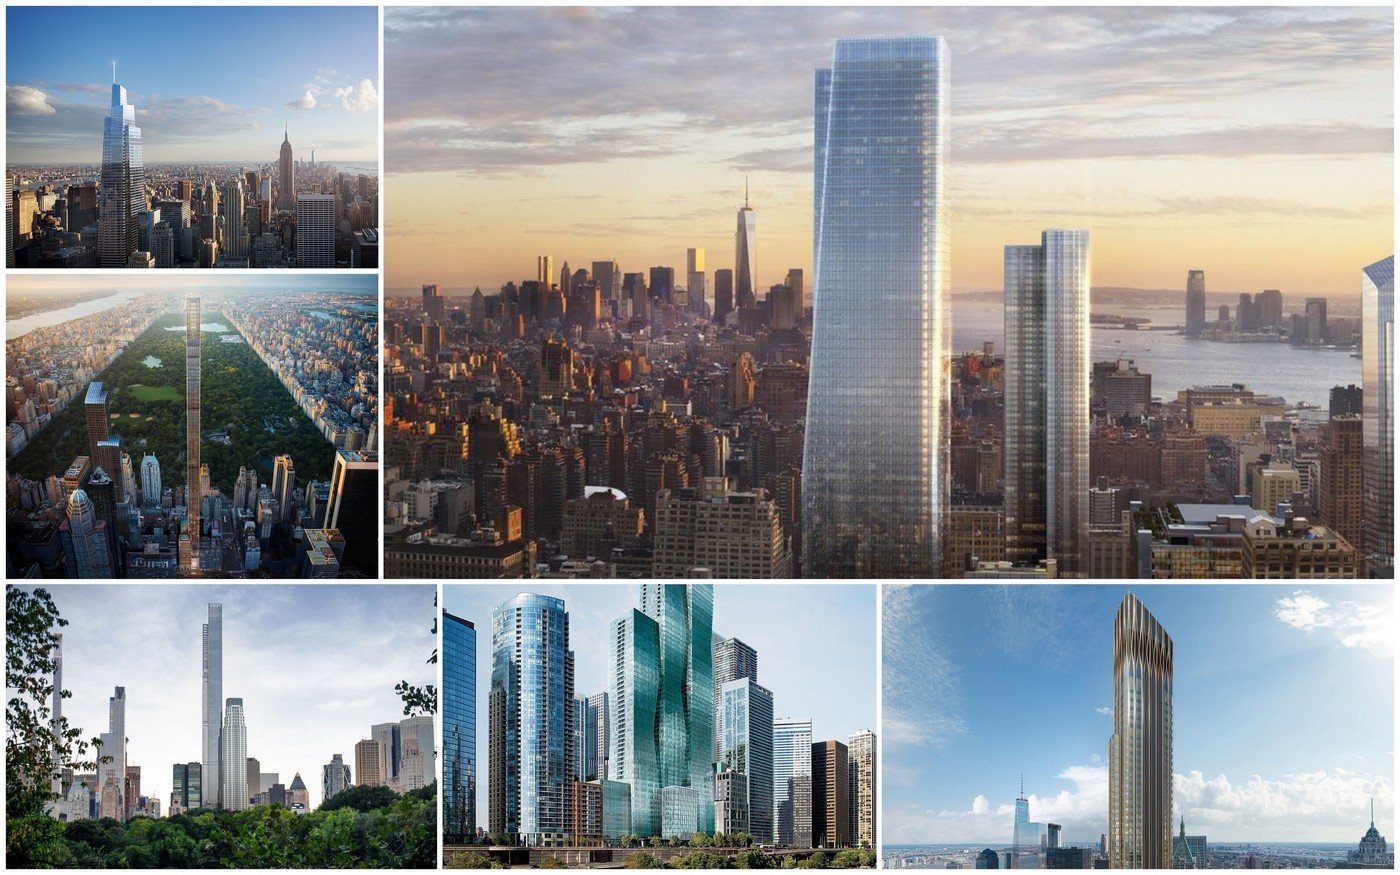 Tall and Stunning - Take a look at these 6 under construction skyscrapers that will change the skyline of New York forever - Luxurylaunches